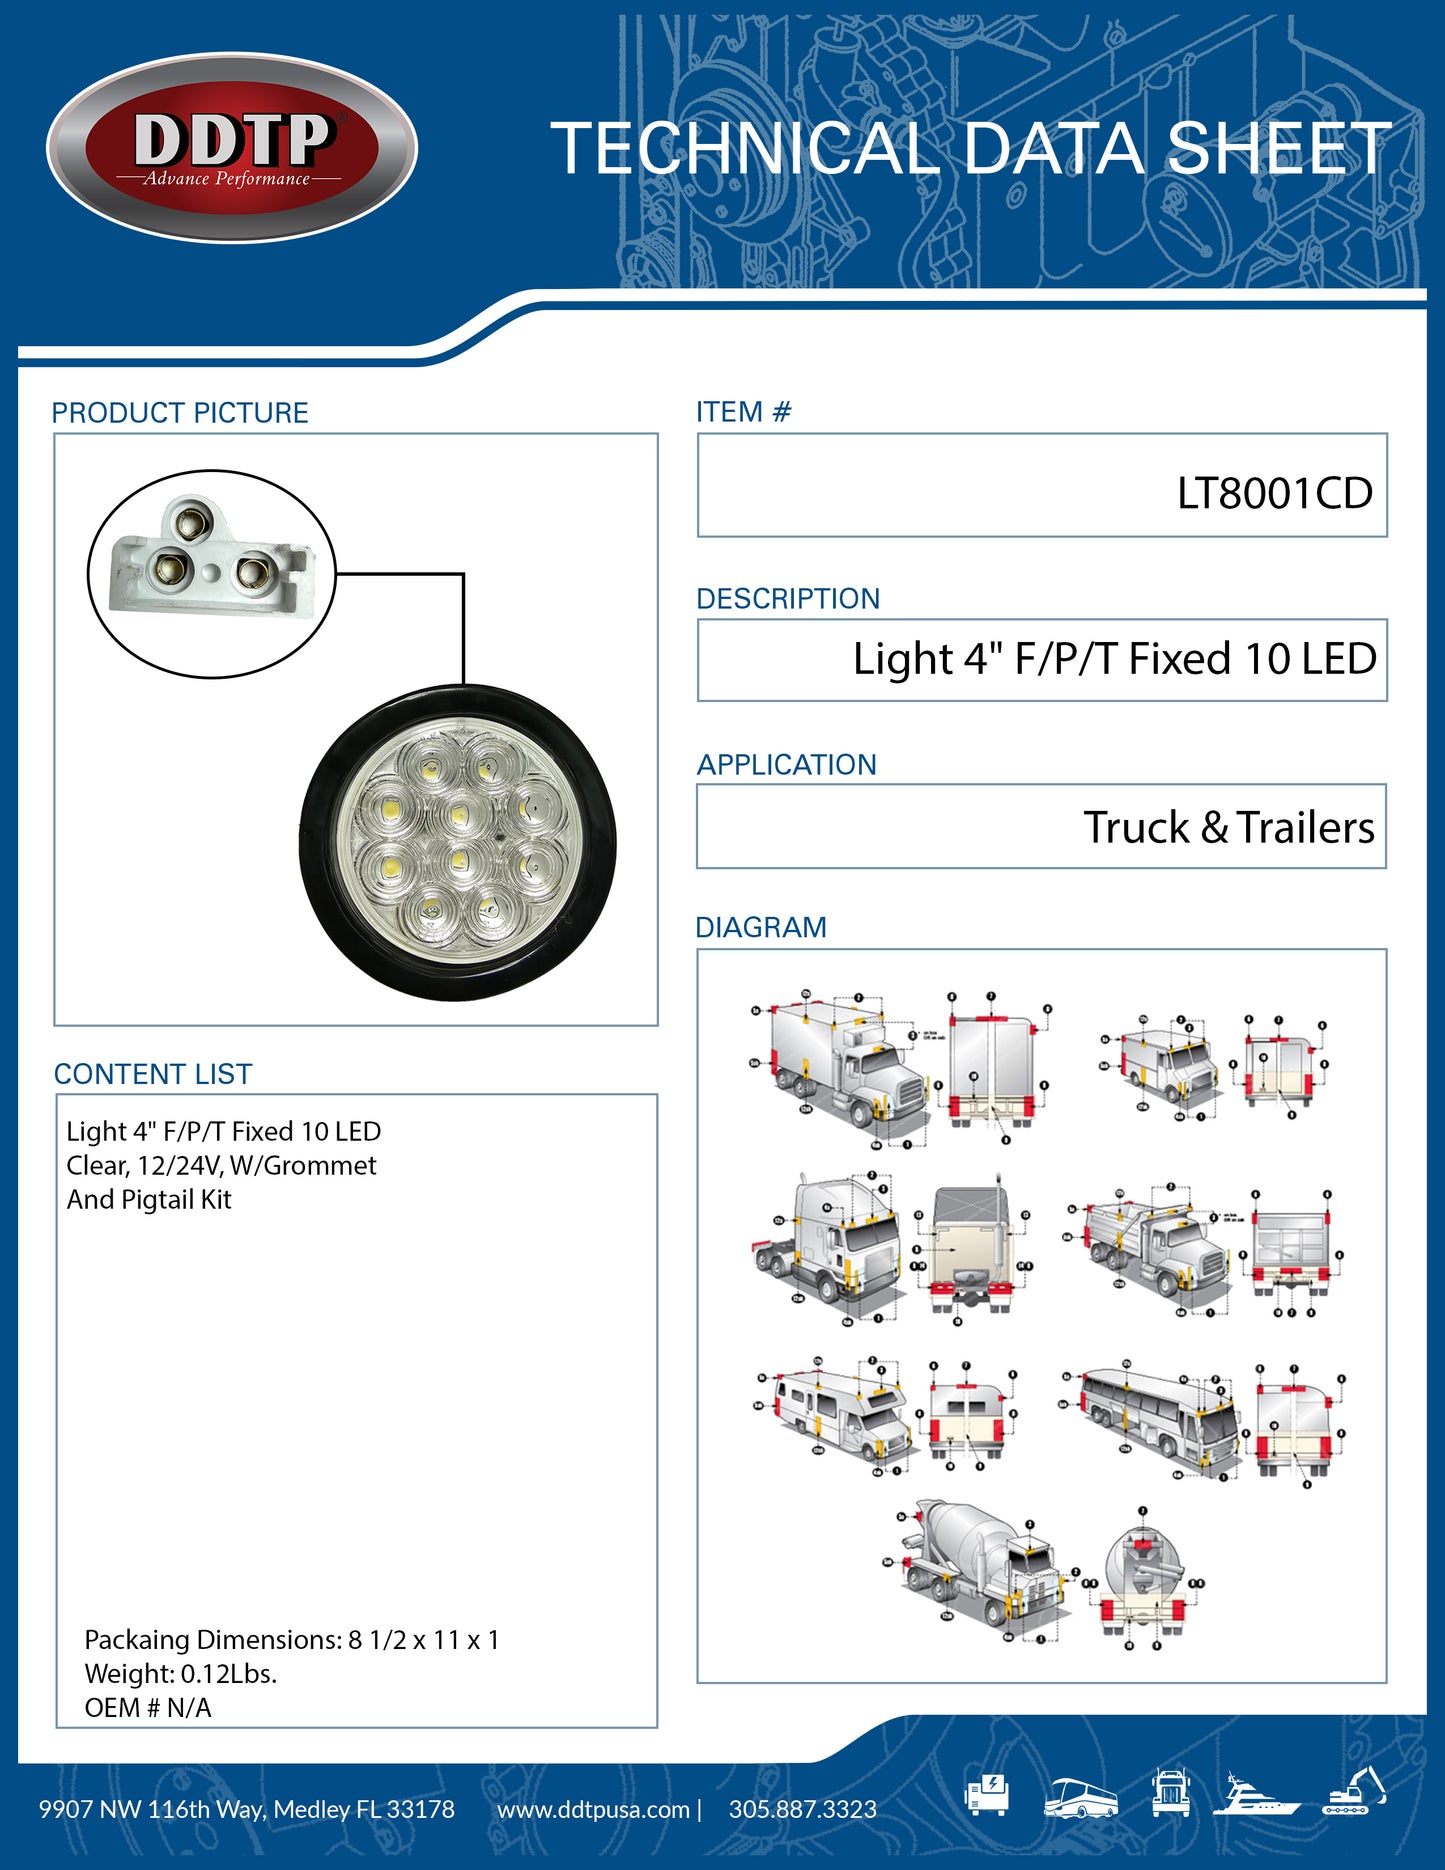 Light 4" F/P/T Fixed 10 LED Clear, 12/24V, W/Grommet And Pigtail Kit